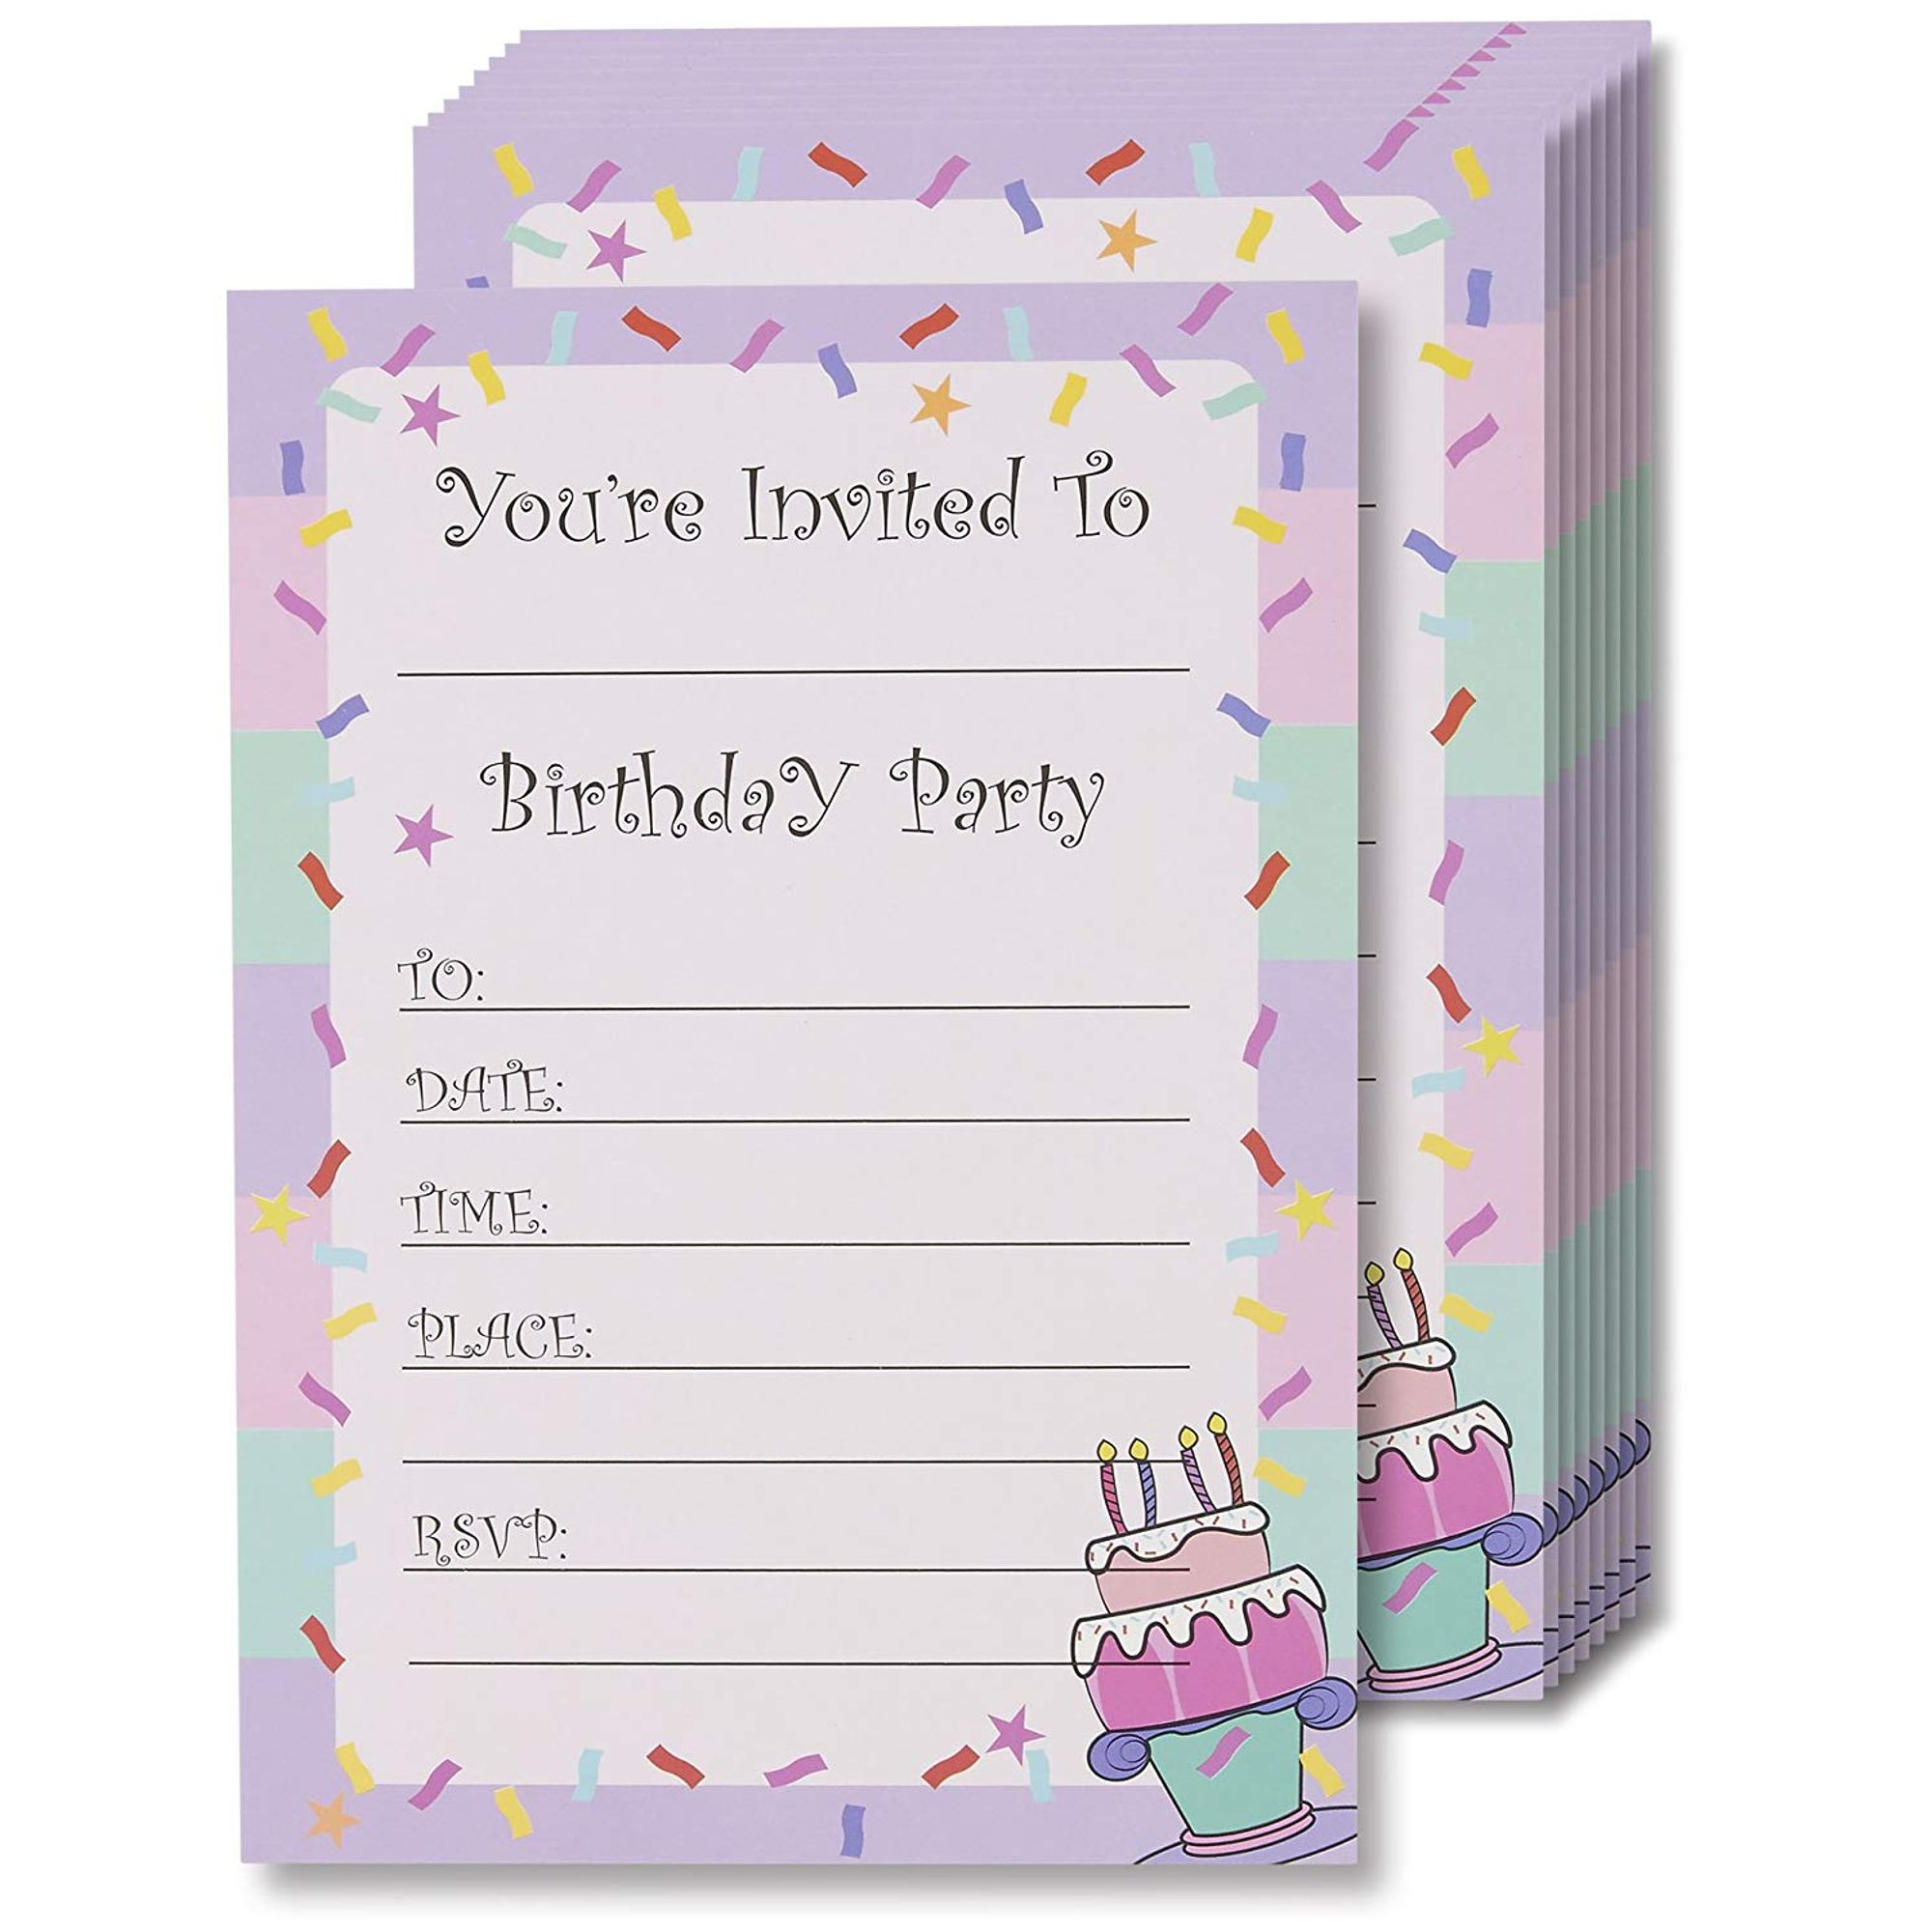 Invitation Cards 24 Pack Birthday Party Invitation Cards Fill in 